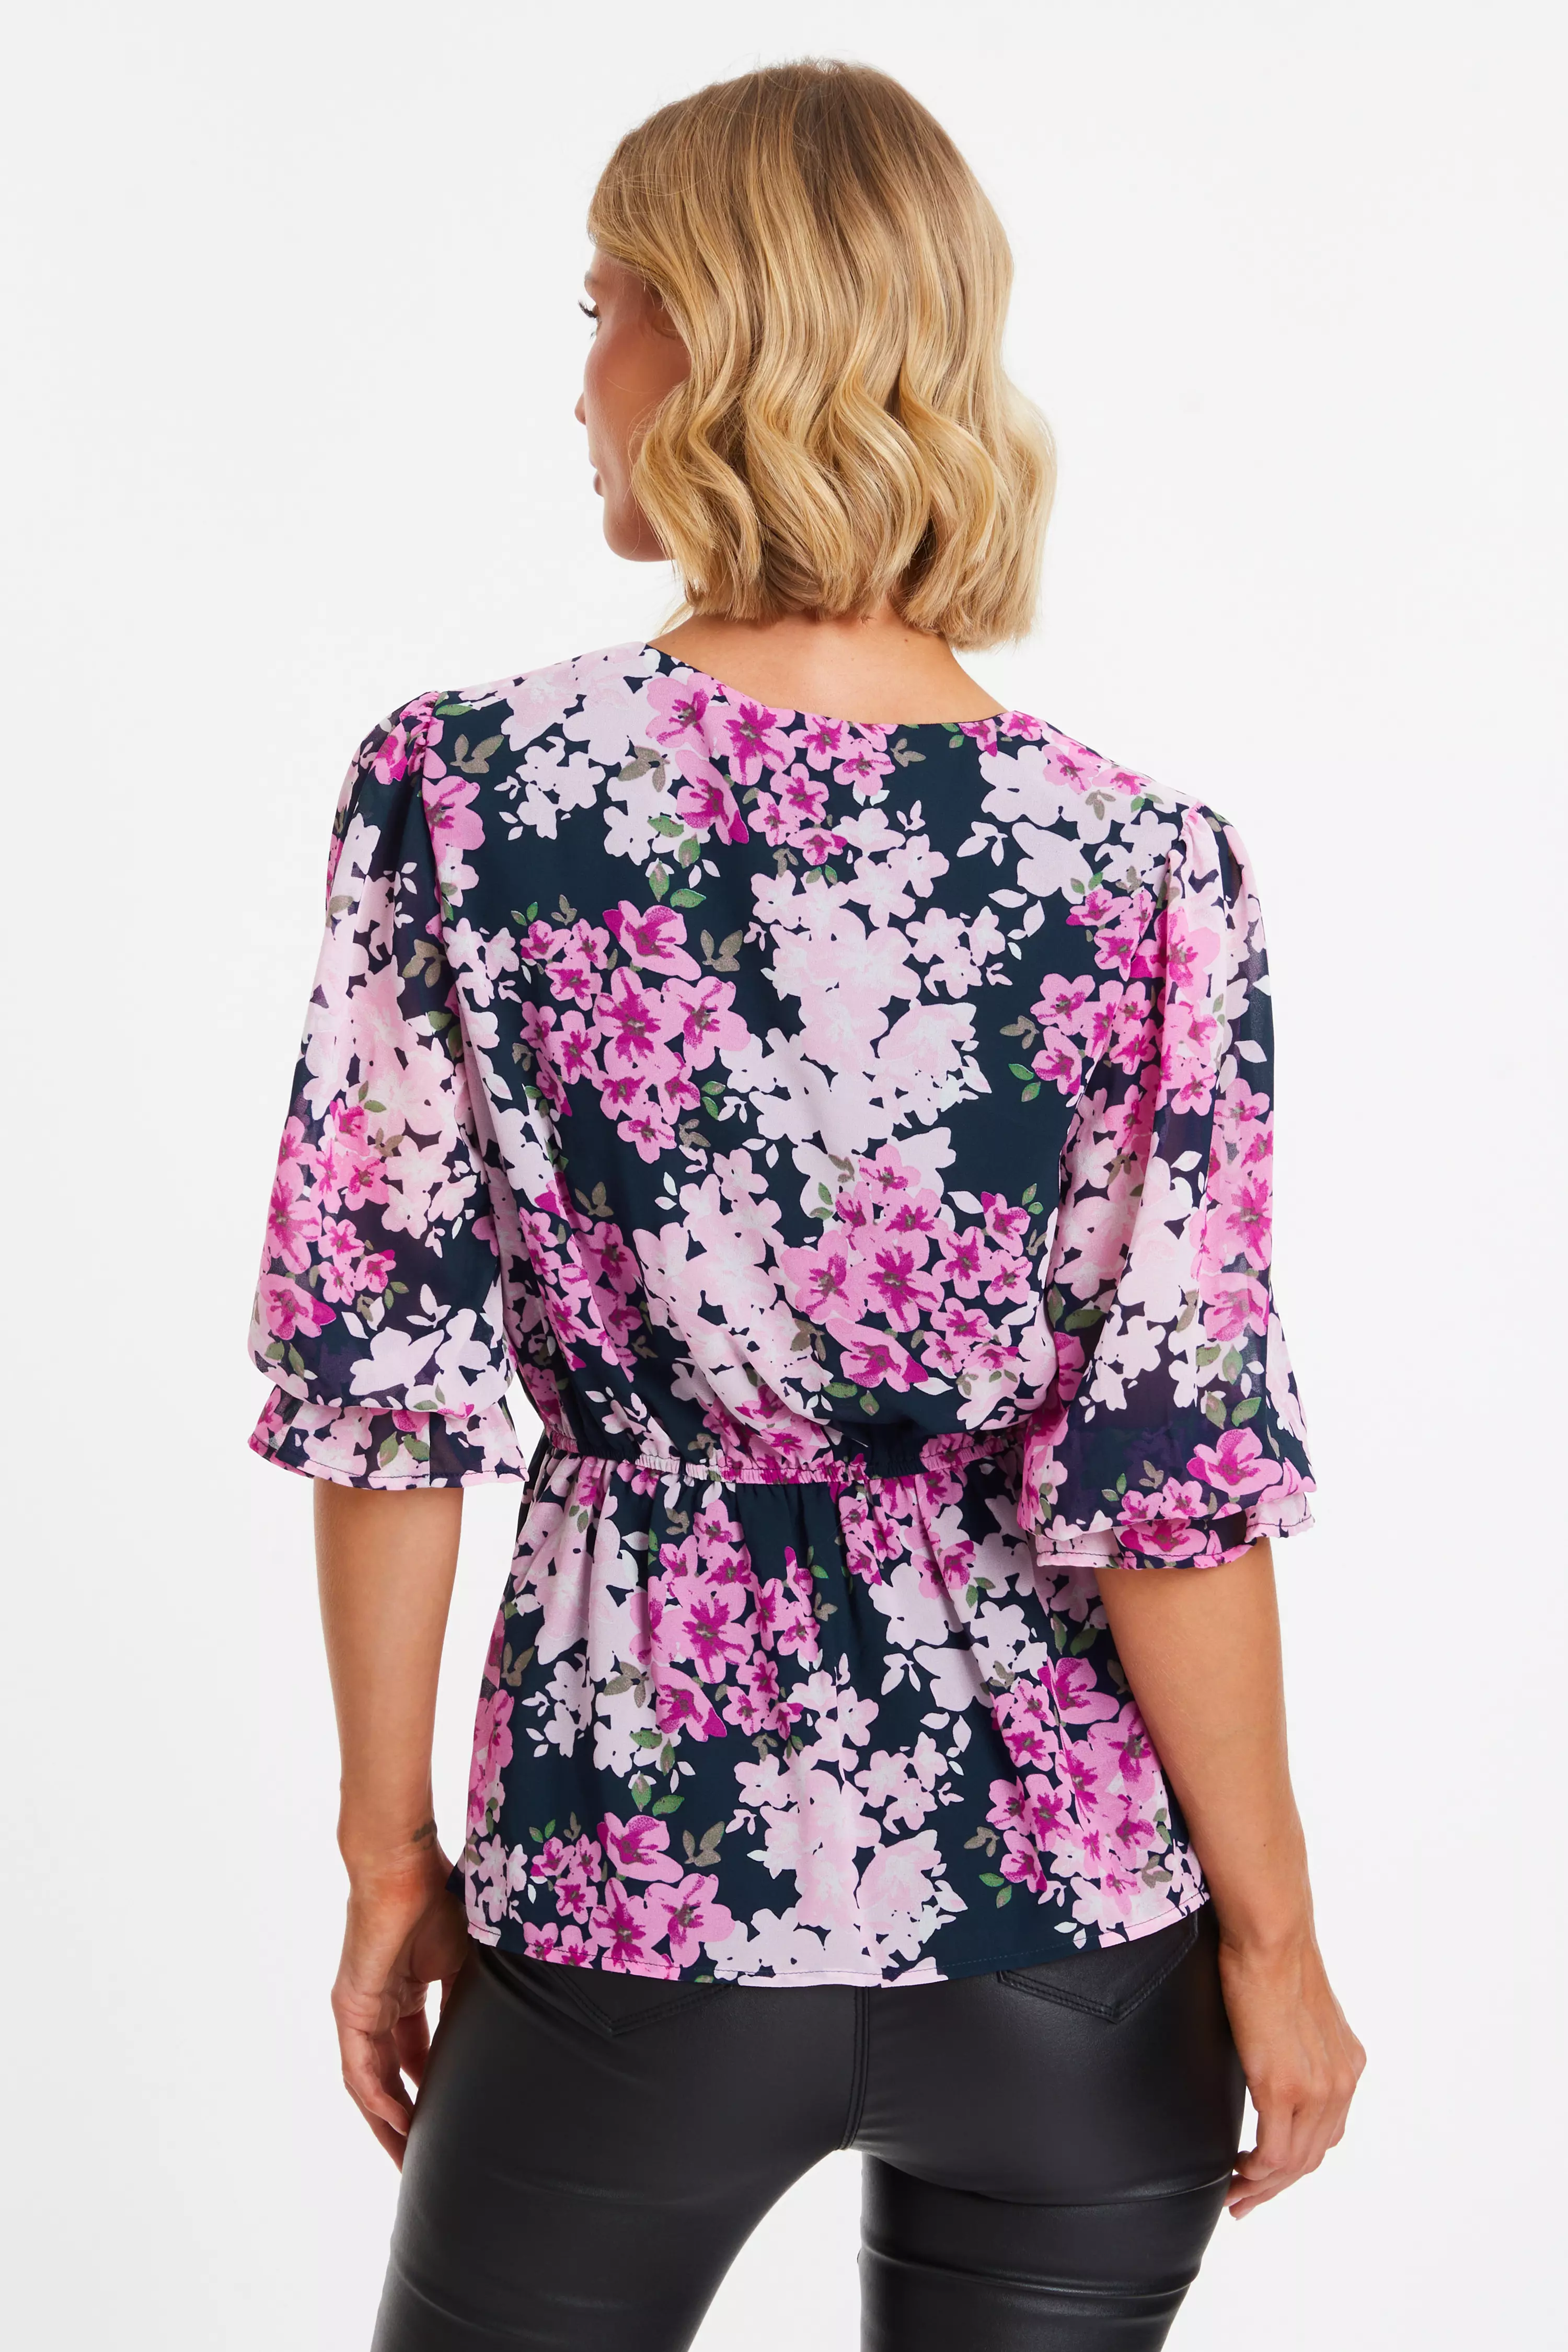 Pink Floral Wrap Top - QUIZ Clothing